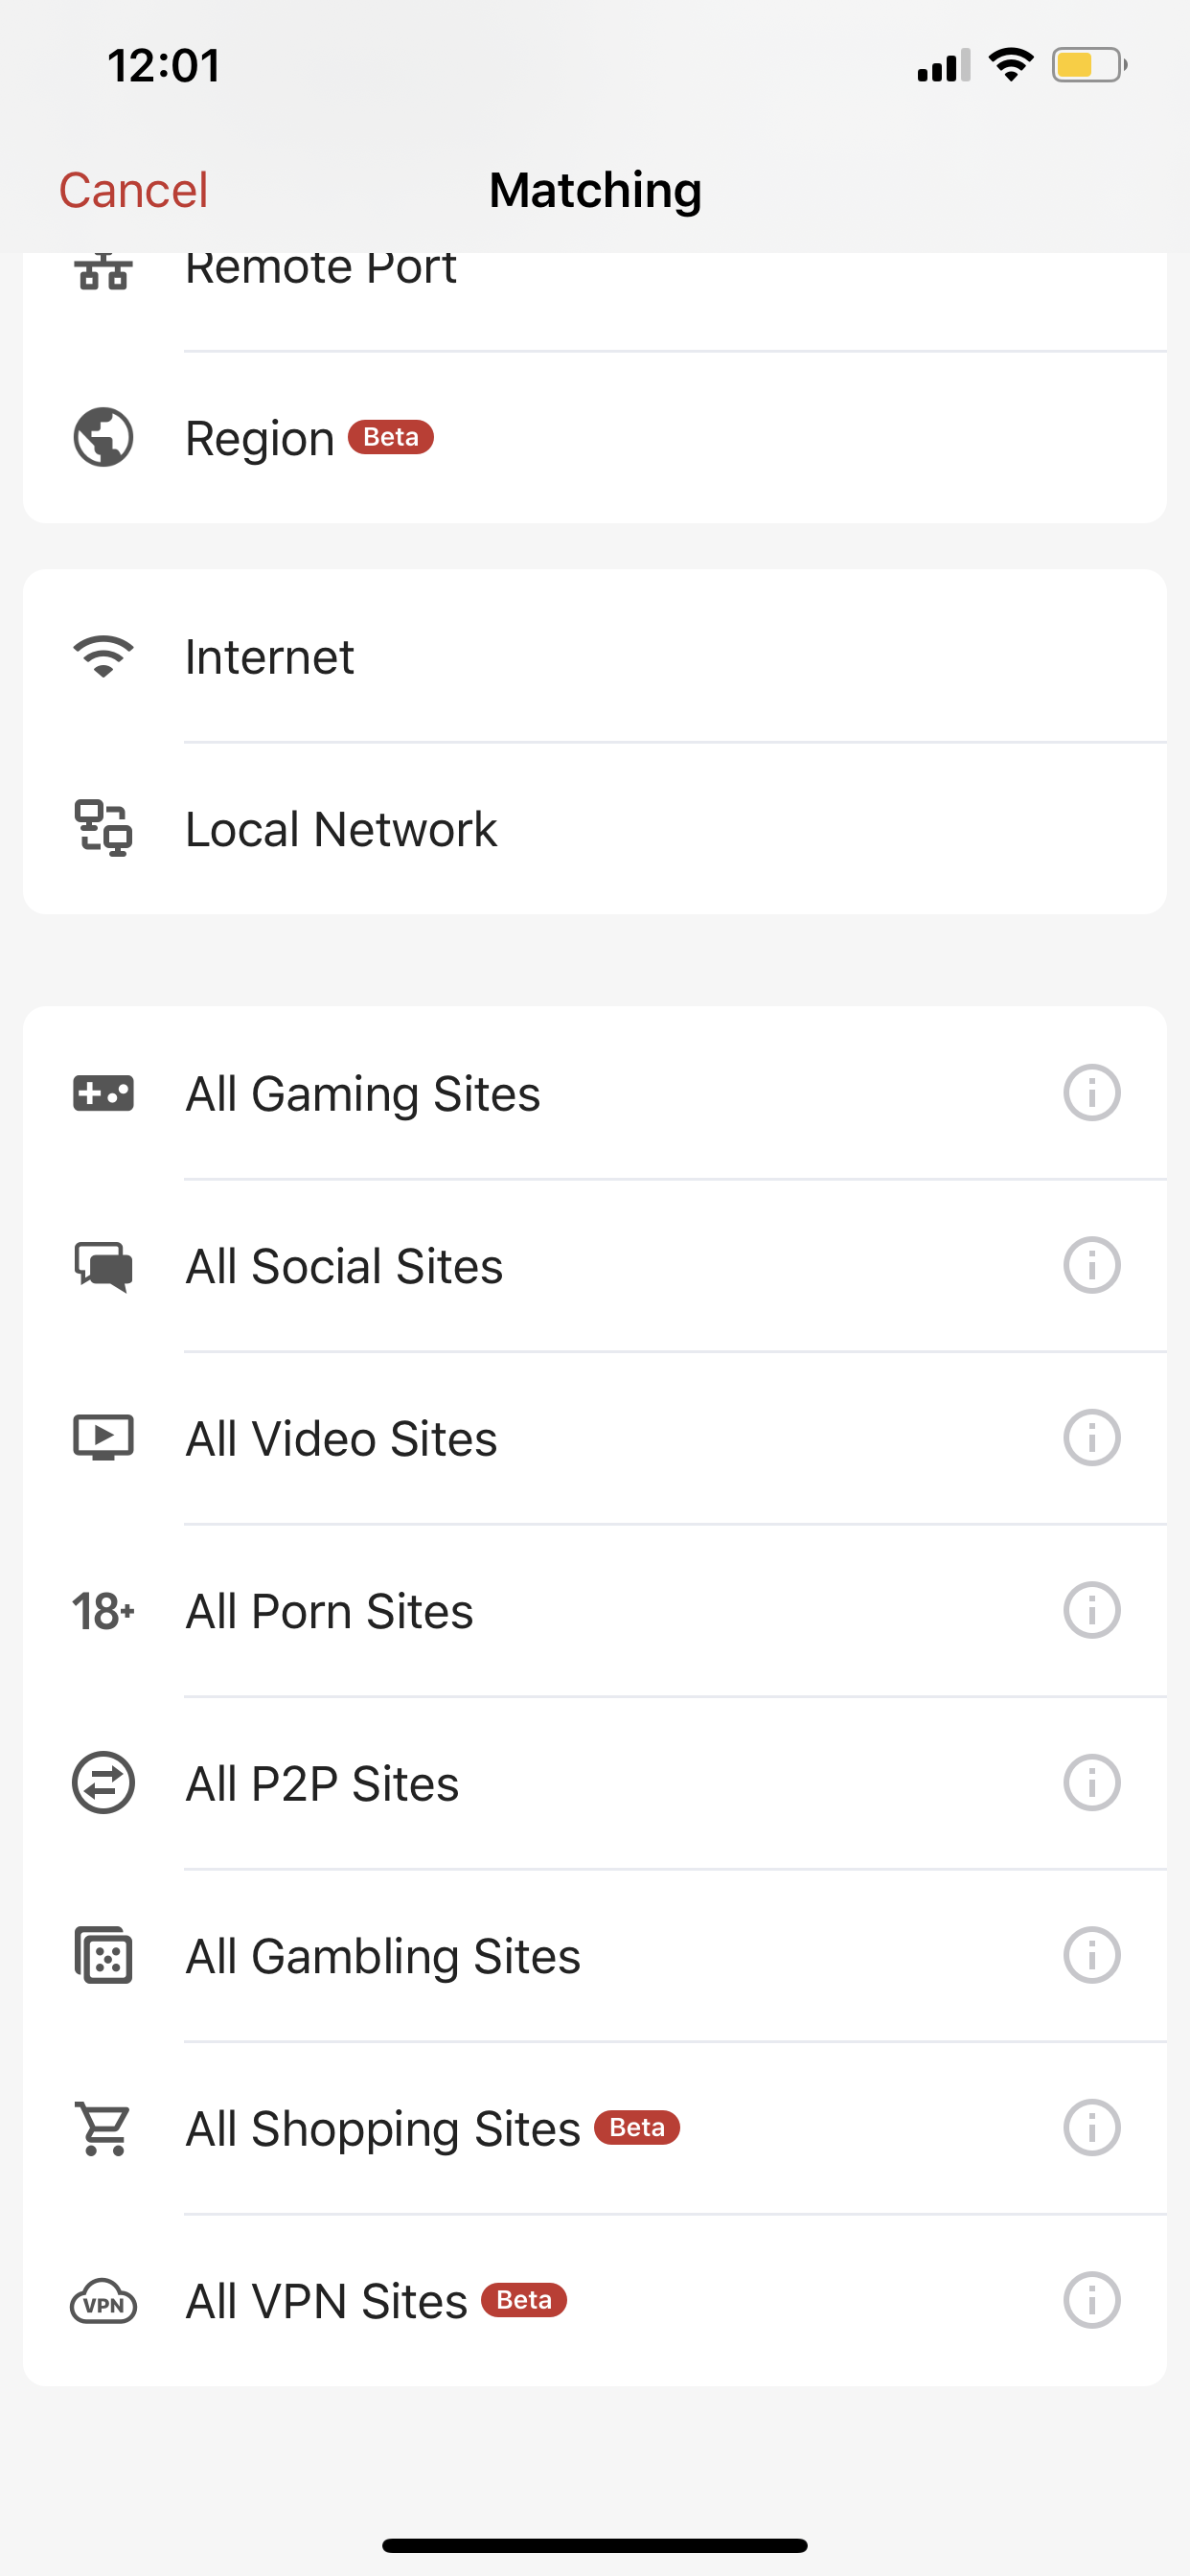 Firewall App Matching options to block activity by category